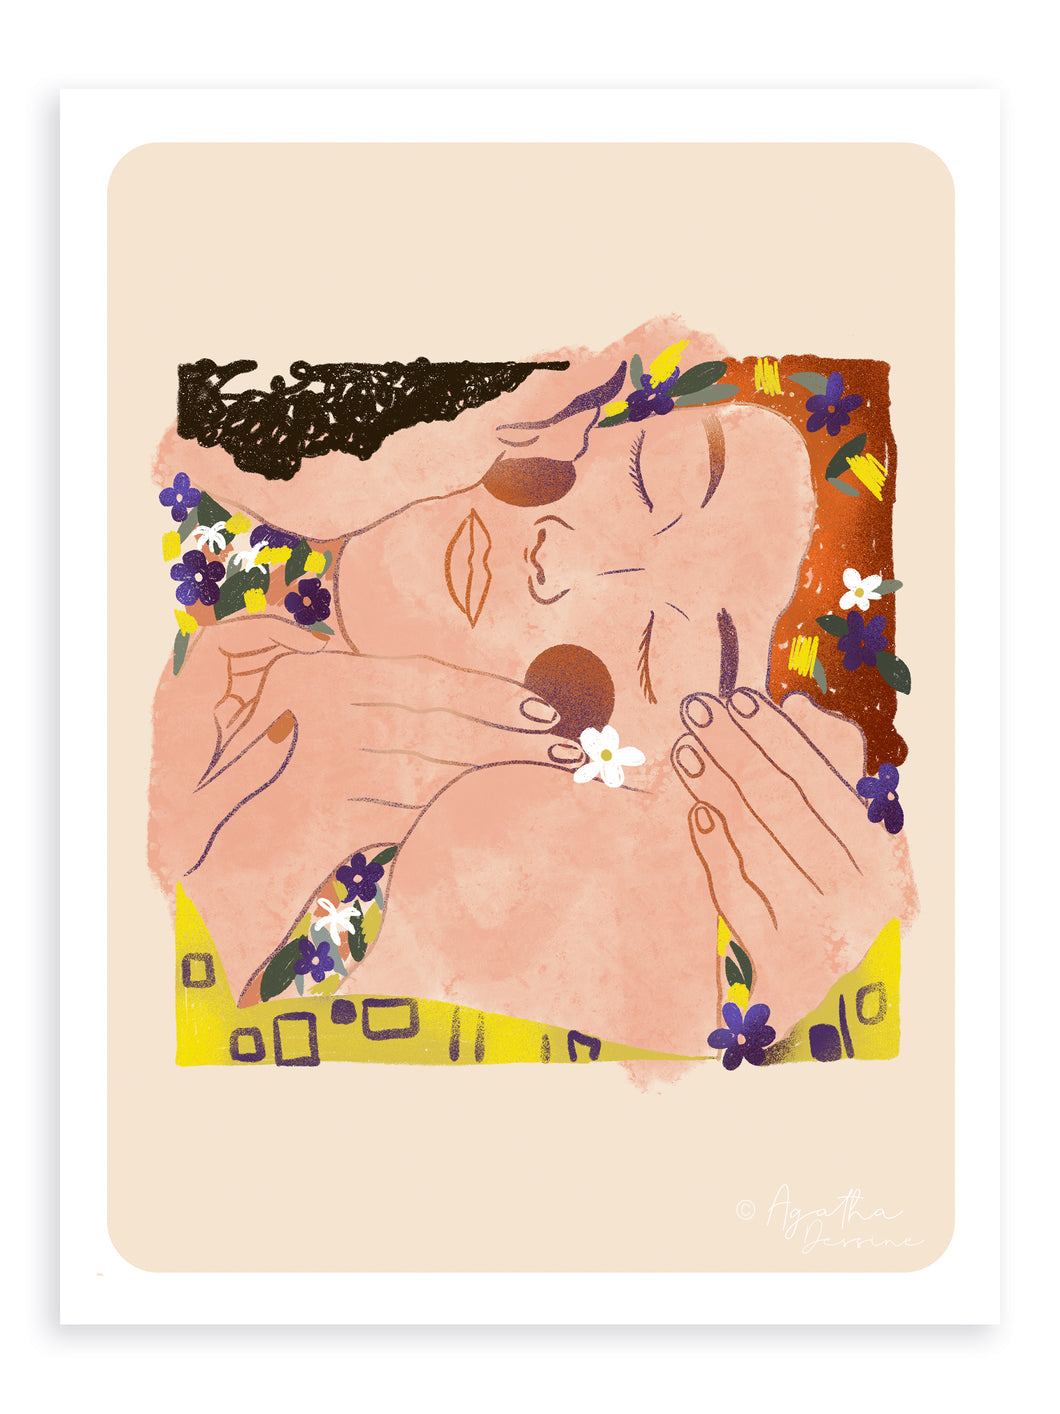 Les amants inspired by Klimt